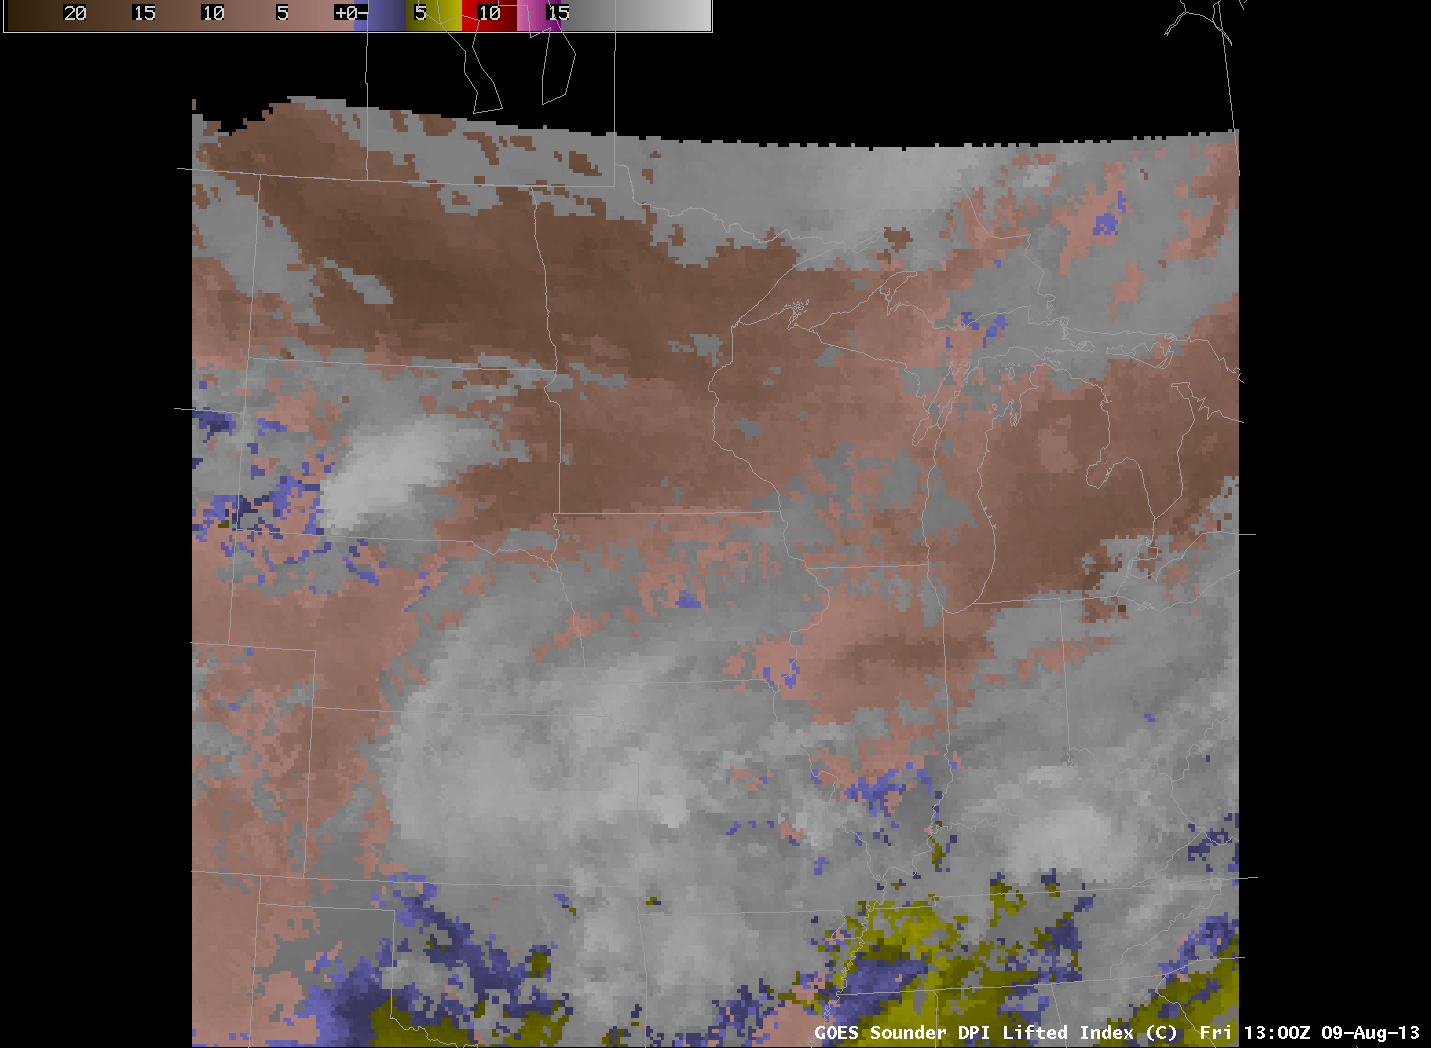 GOES-13 Sounder DPI estimates of Lifted Index (Click for animation)